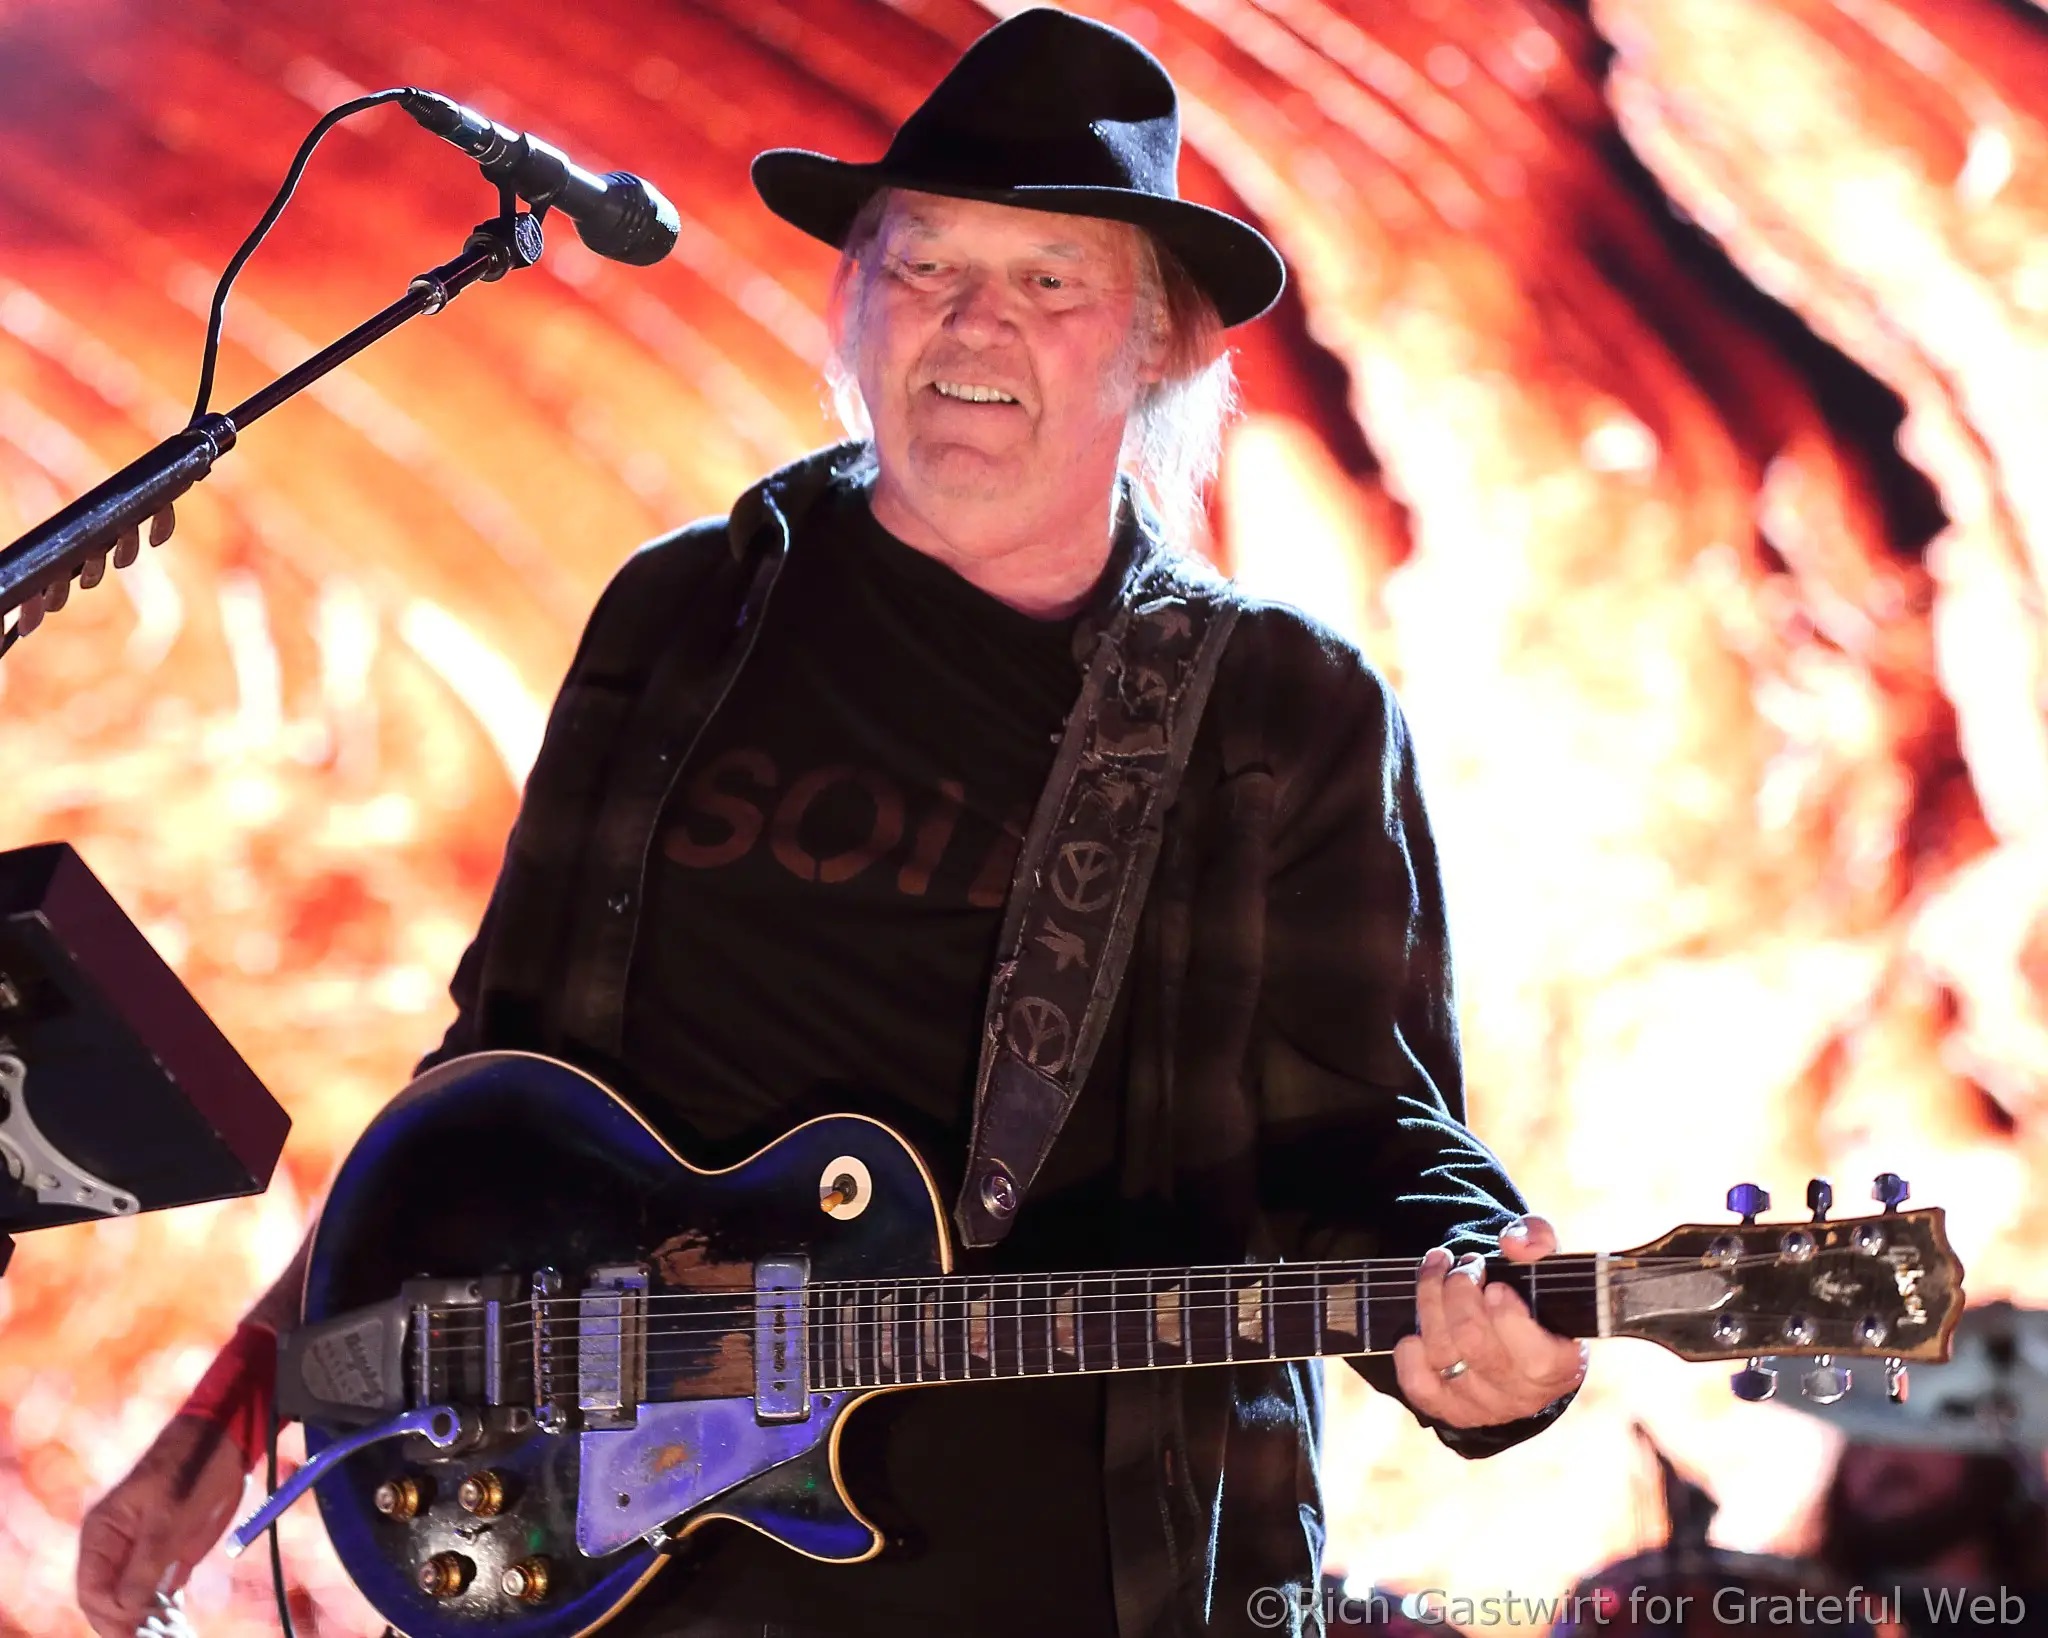 NEIL YOUNG BRINGS LEGENDARY CATALOG EXCLUSIVELY TO APPLE MUSIC IN SPATIAL AUDIO